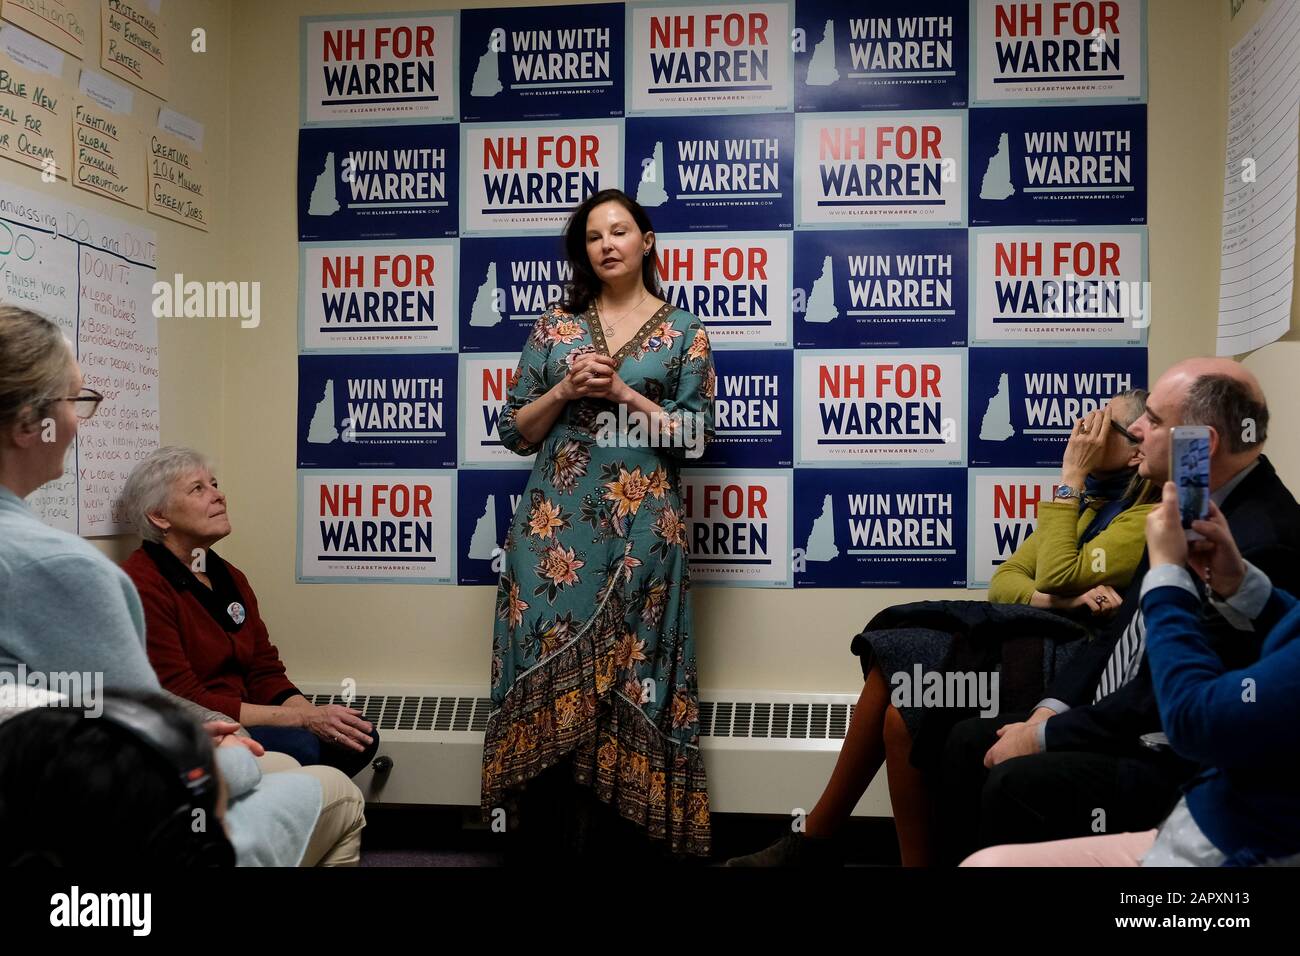 Lebanon, USA. 24th Jan, 2020. Actress and activist Ashley Judd campaigns for Elizabeth Warren in Lebanon. Credit: SOPA Images Limited/Alamy Live News Stock Photo